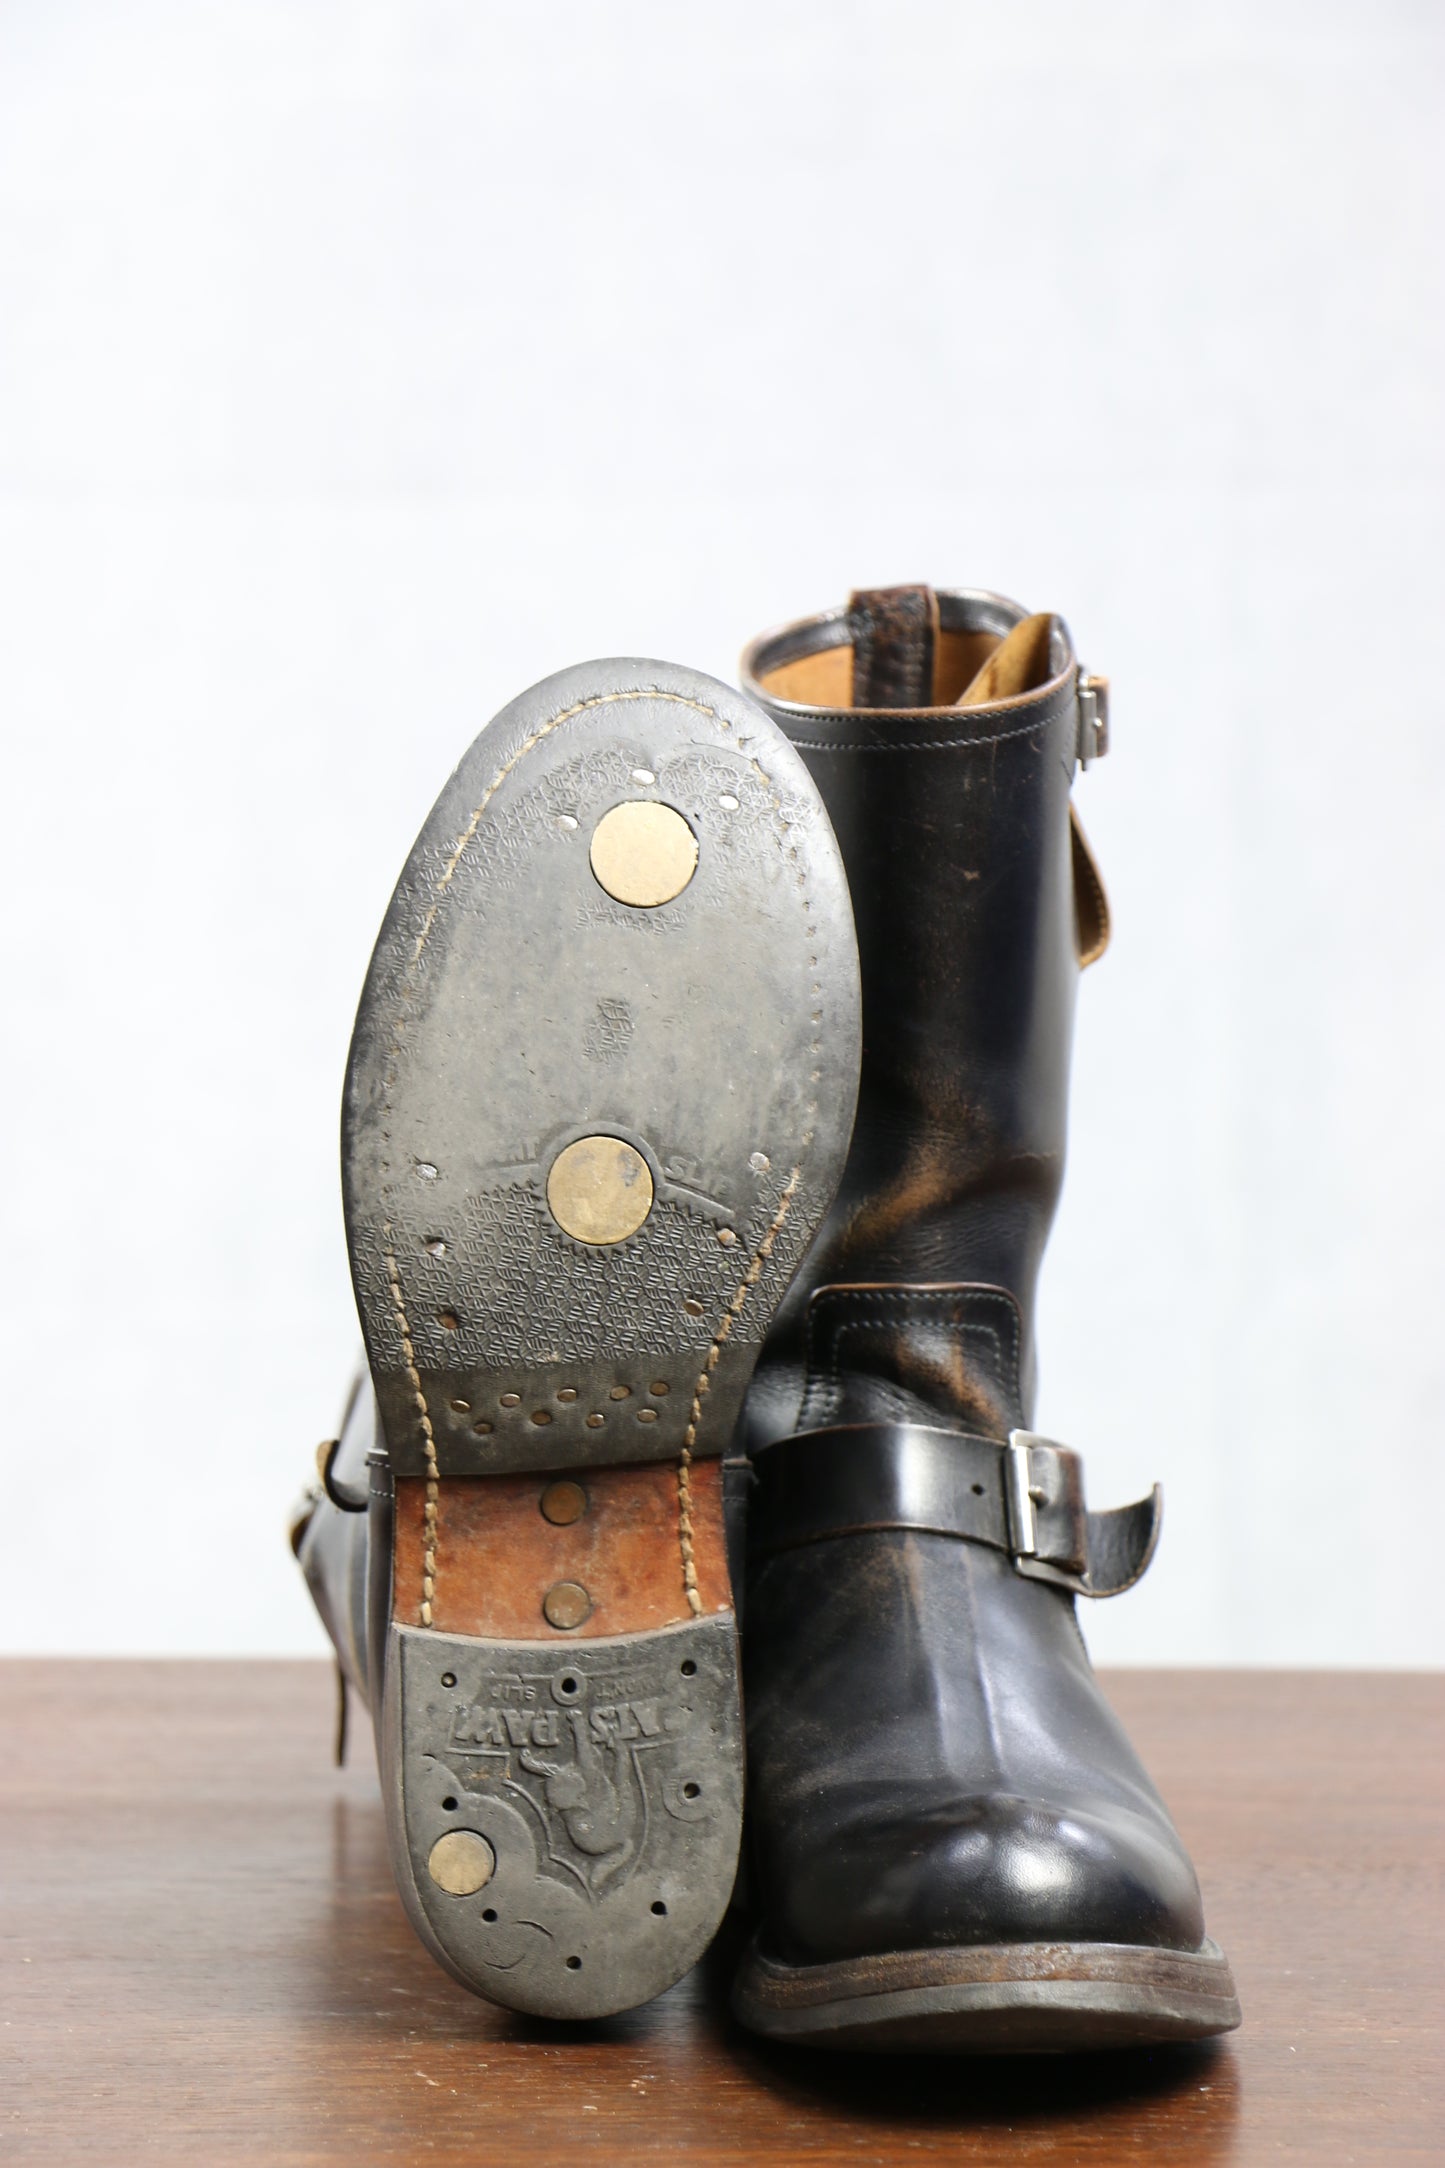 The Real McCoy's Buco Horsehide Engineer Boots